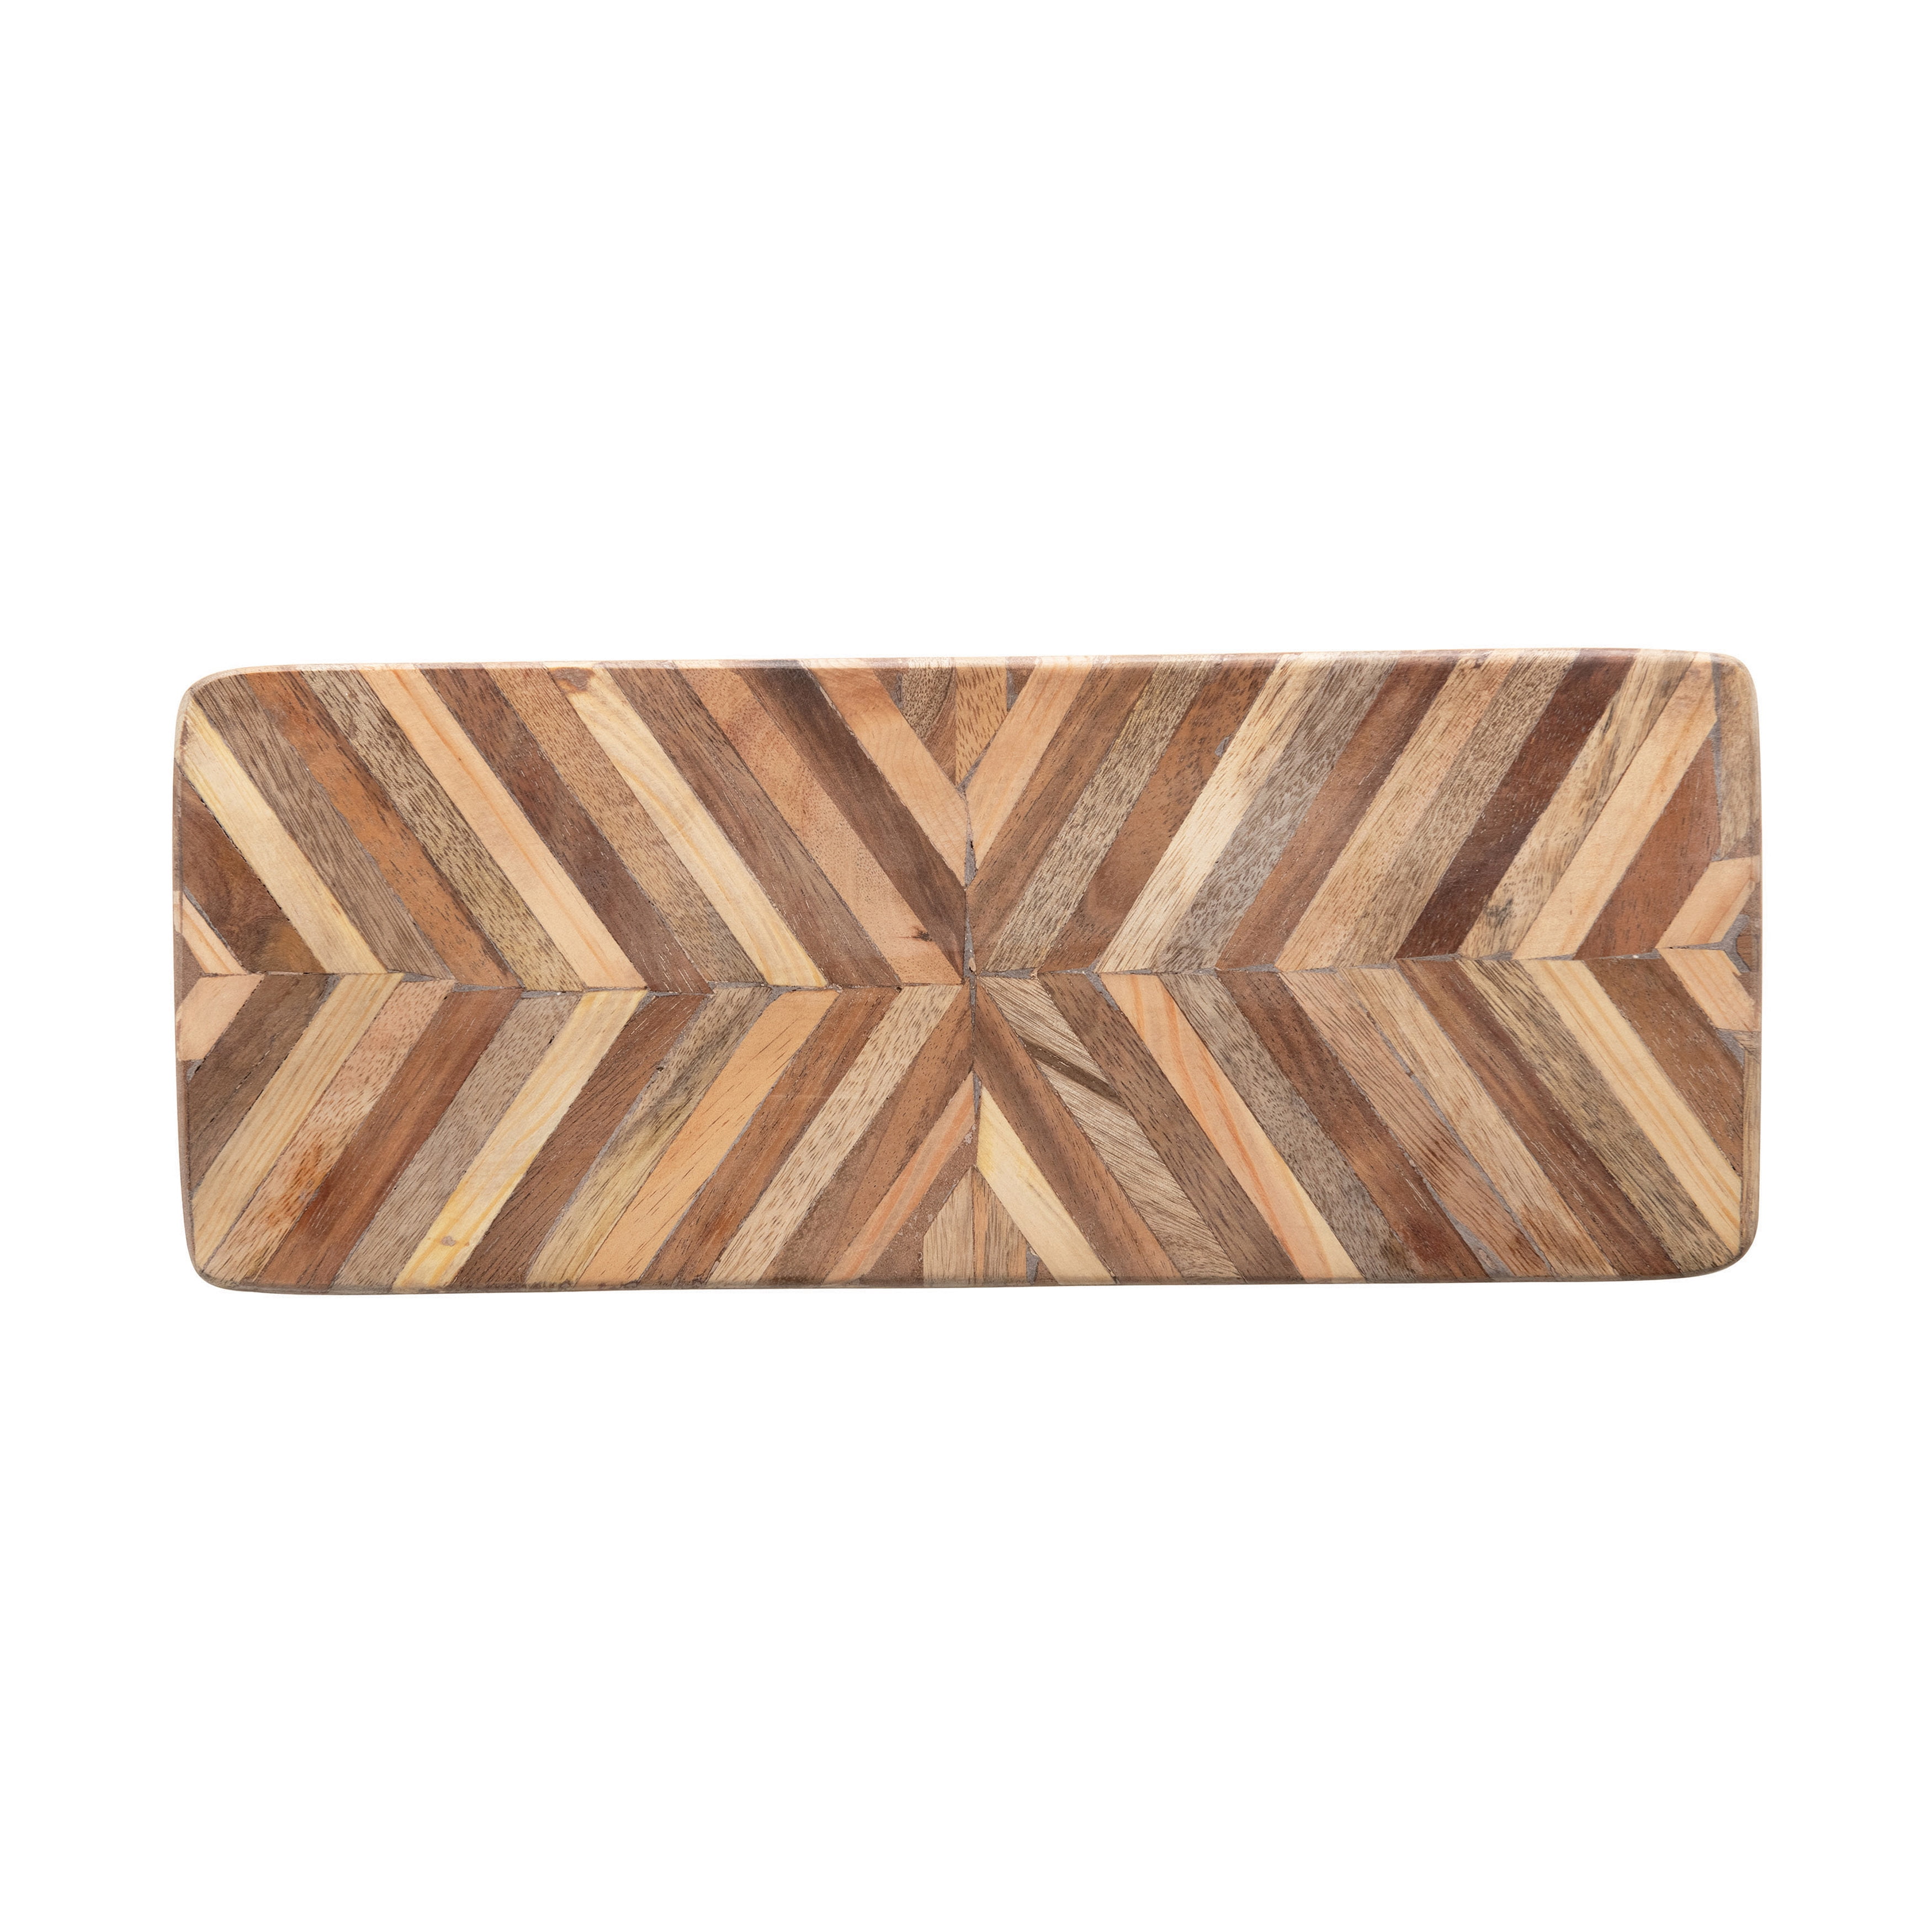 Chevron Pattern Wooden Round Cutting Board & Cheese Board – Sew and Saw